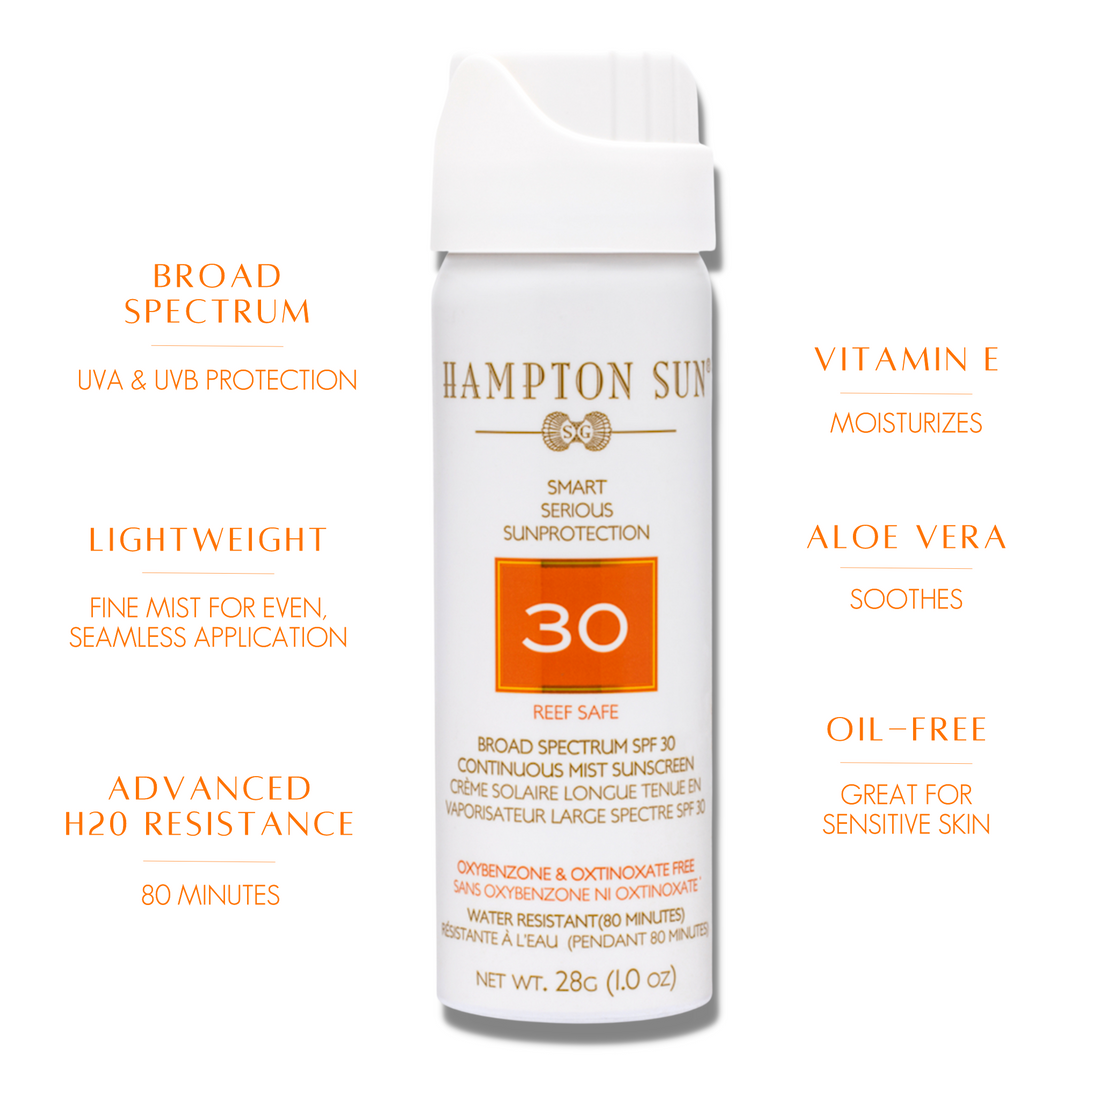 SPF 30 Continuous Mist Sunscreen - 1.0 oz. Travel Size